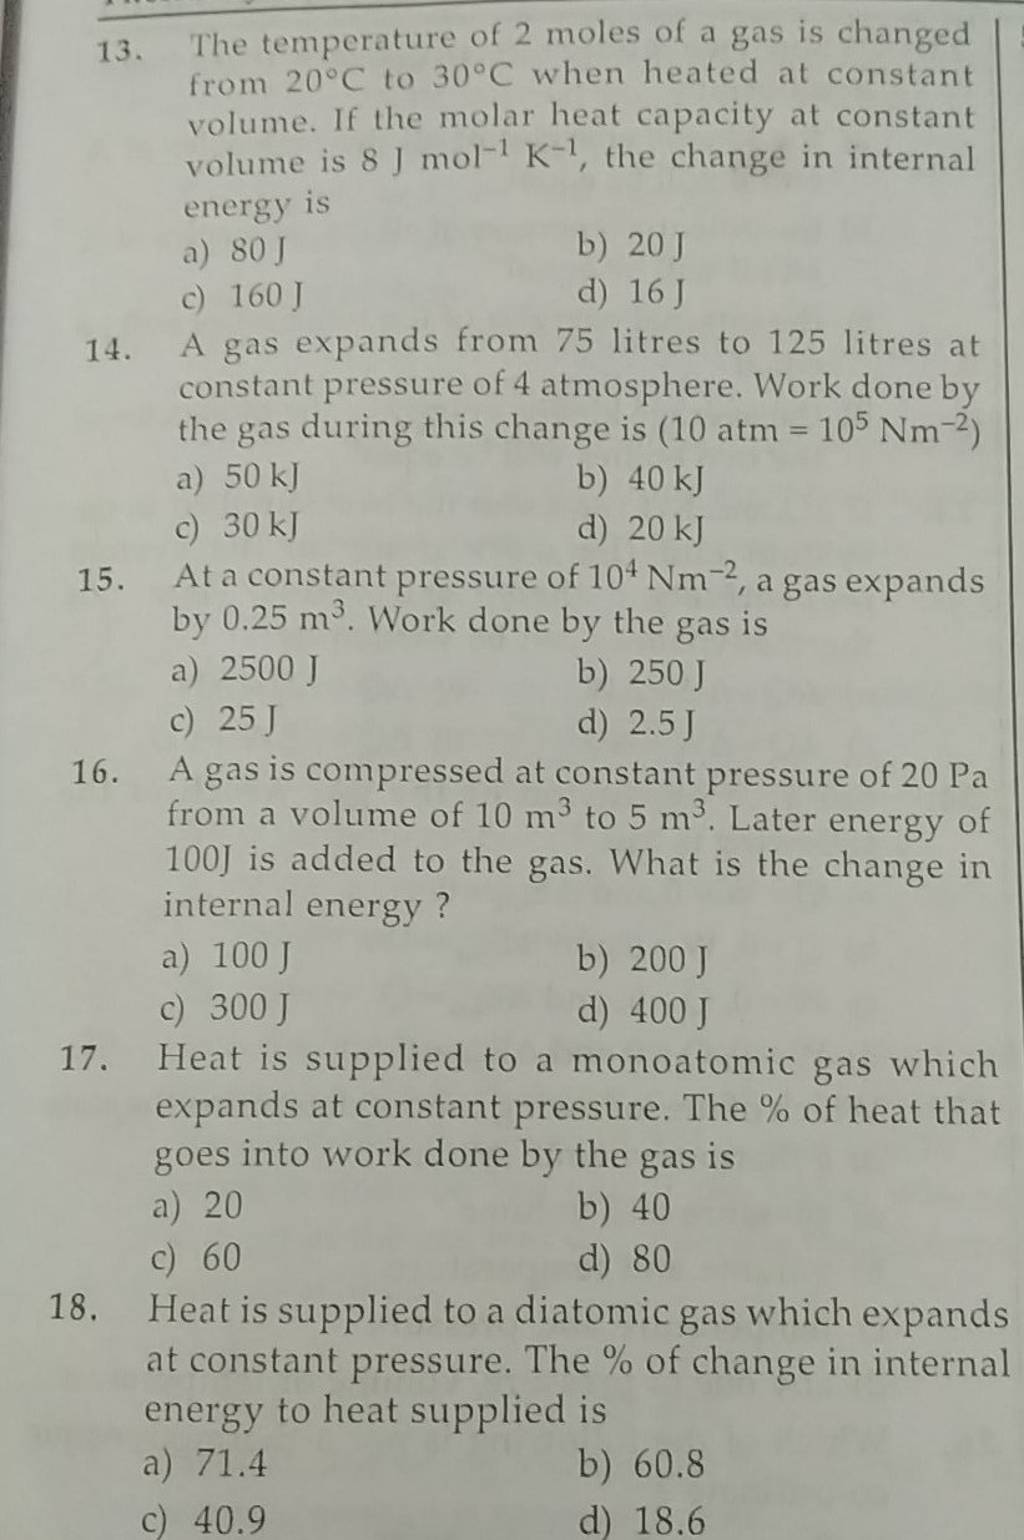 Heat is supplied to a monoatomic gas which expands at constant pressur